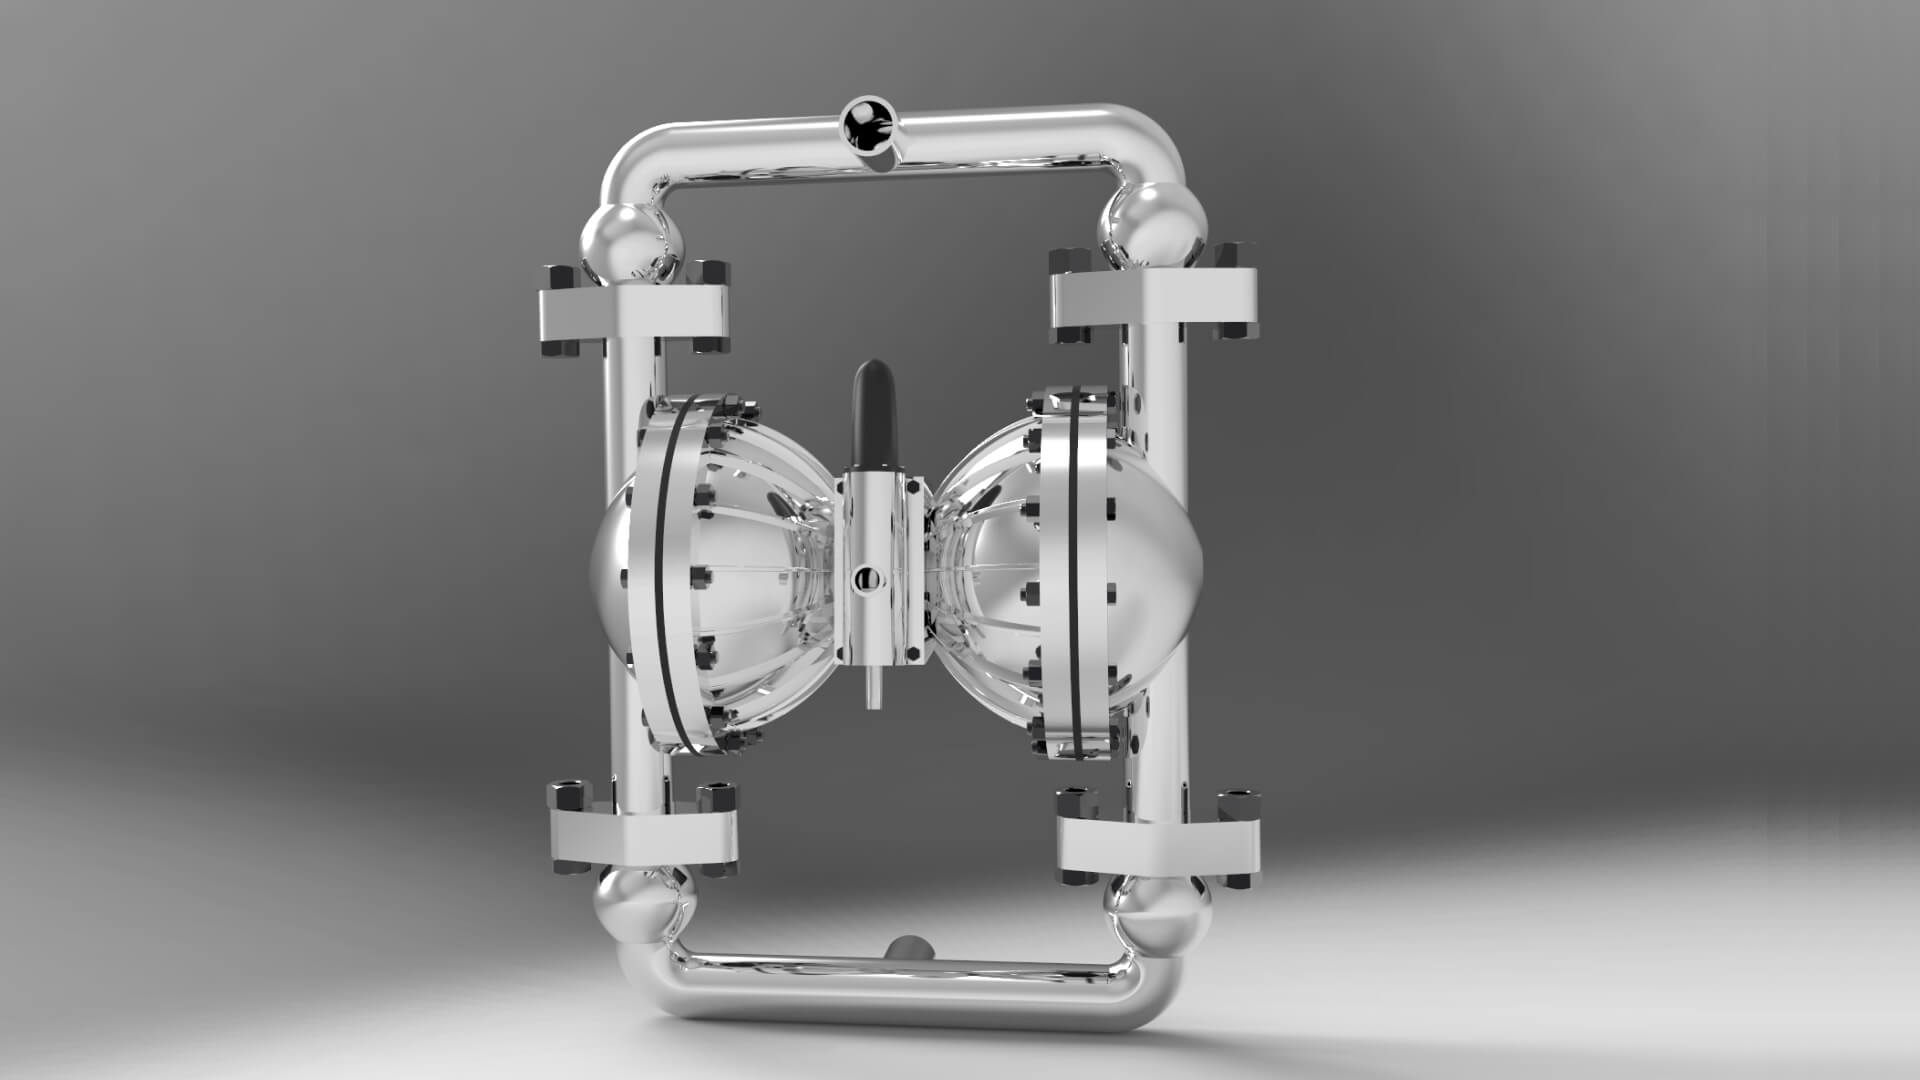 A 3D CAD drawing of the interior of an industrial air-operated diaphragm pump.